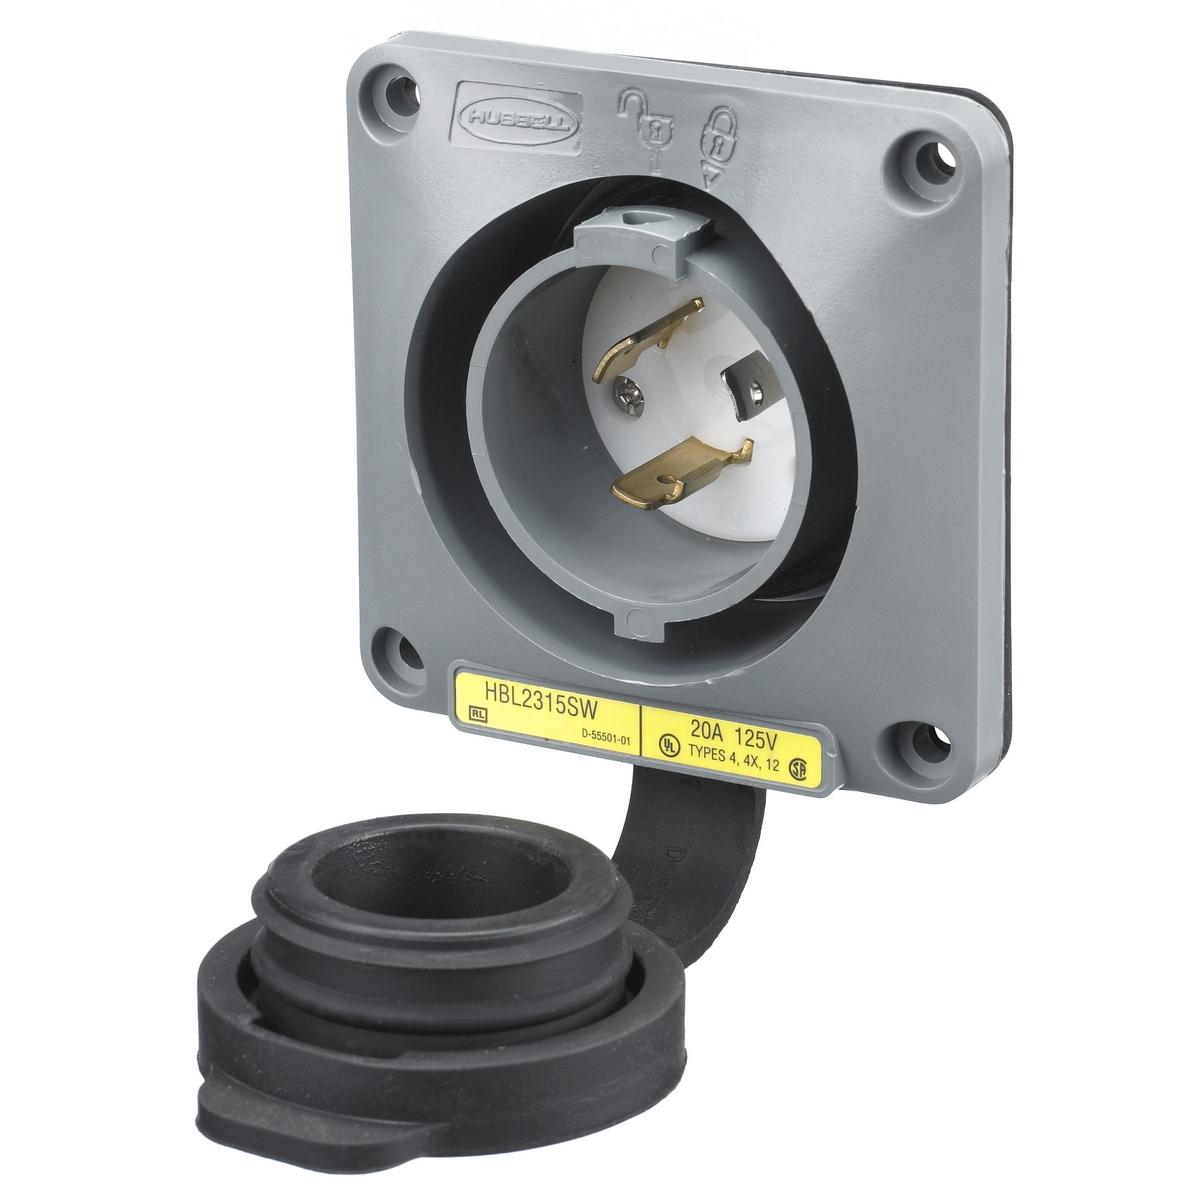 Hubbell HBL2315SW Watertight Safety-Shroud®, Locking Devices, Twist-Lock®, Flanged Inlet, 20A 125V AC, 2-Pole 3-Wire Grounding, NEMA L5-20P, Screw Terminal, Gray  ; UL Type 4X Environmental seal protects connection while in use. ; One-piece, engineered thermoplastic housin